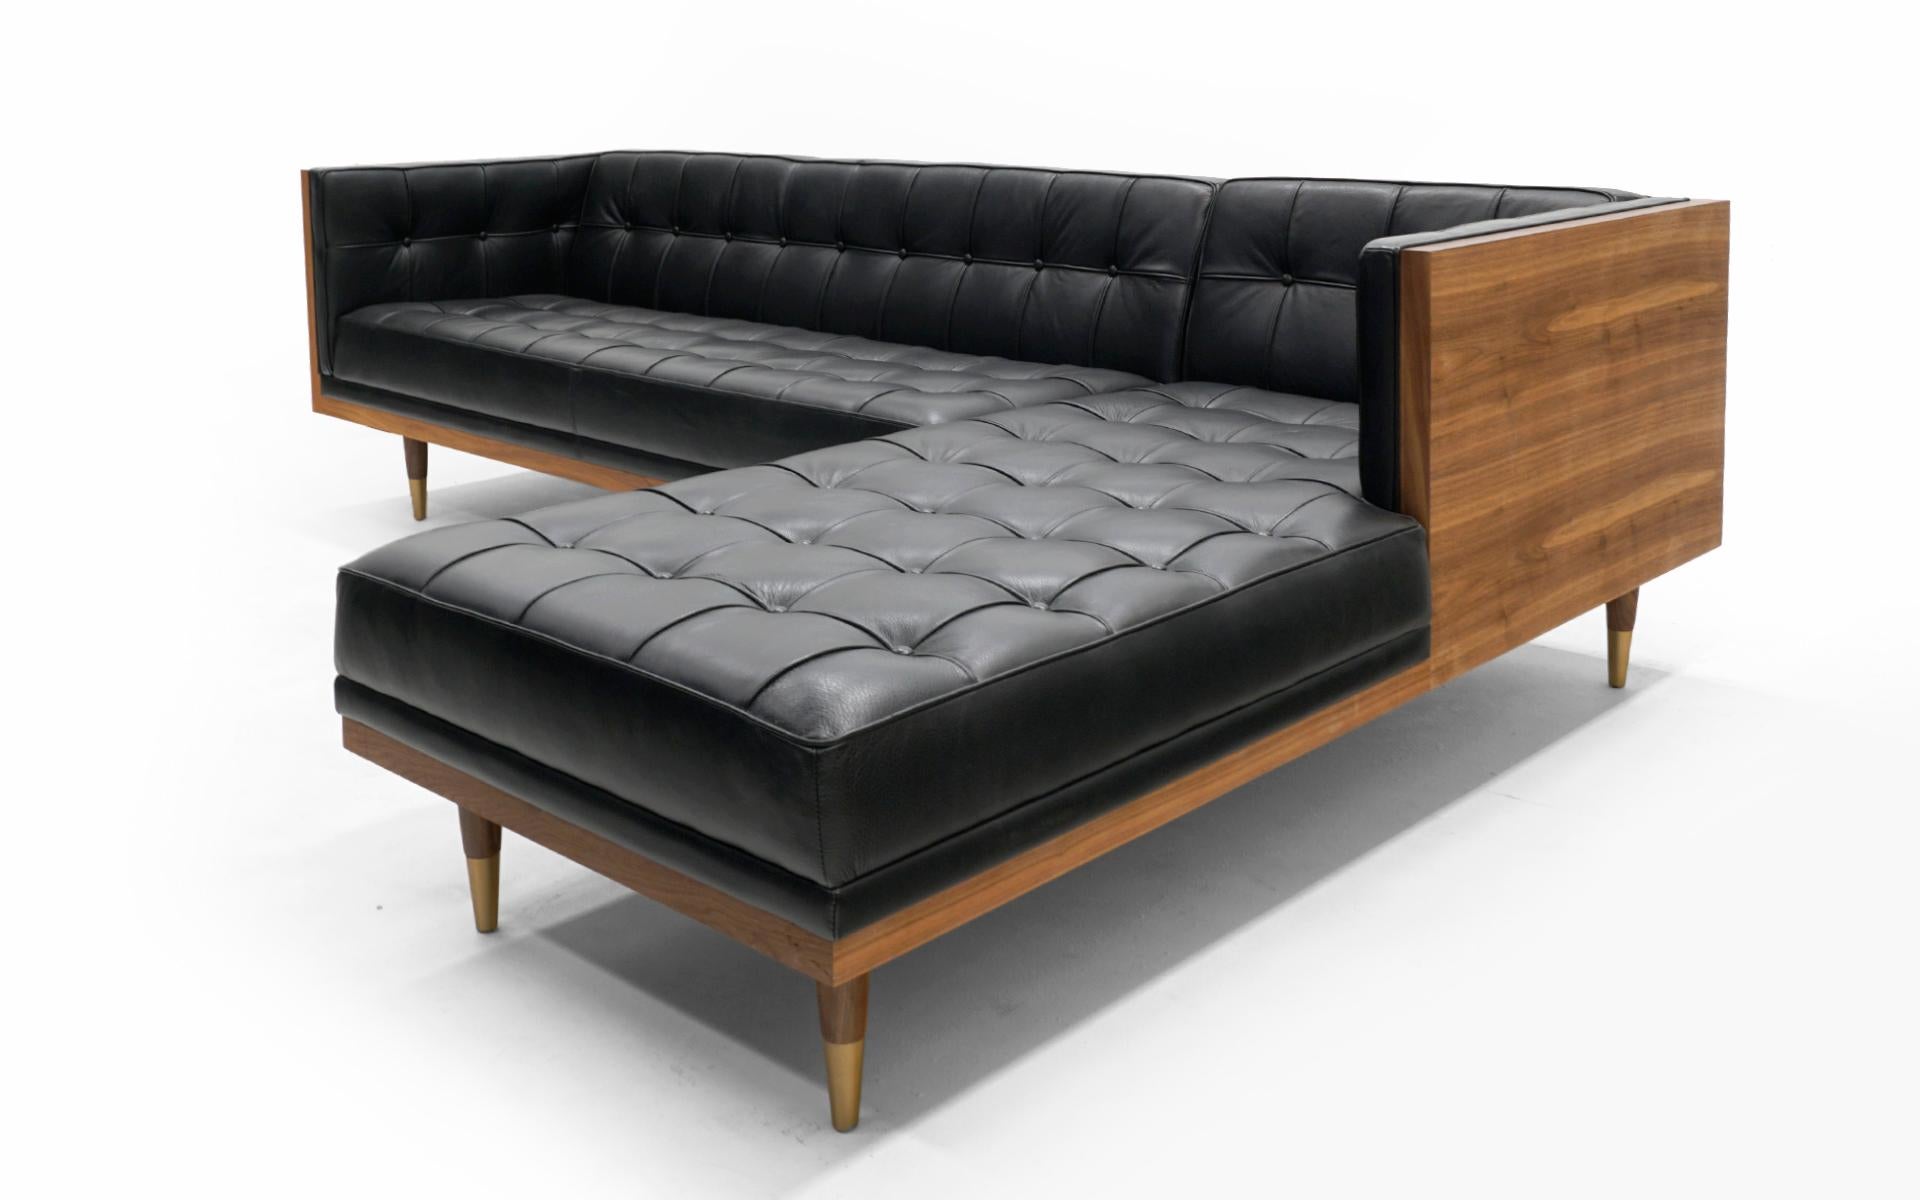 This two piece walnut and leather case sectional sofa with chaise is in virtually unused condition. High quality ufted black aniline dyed leather in the style of a Barcelona daybed. Hardwood walnut case makes this sofa look great from any angle.